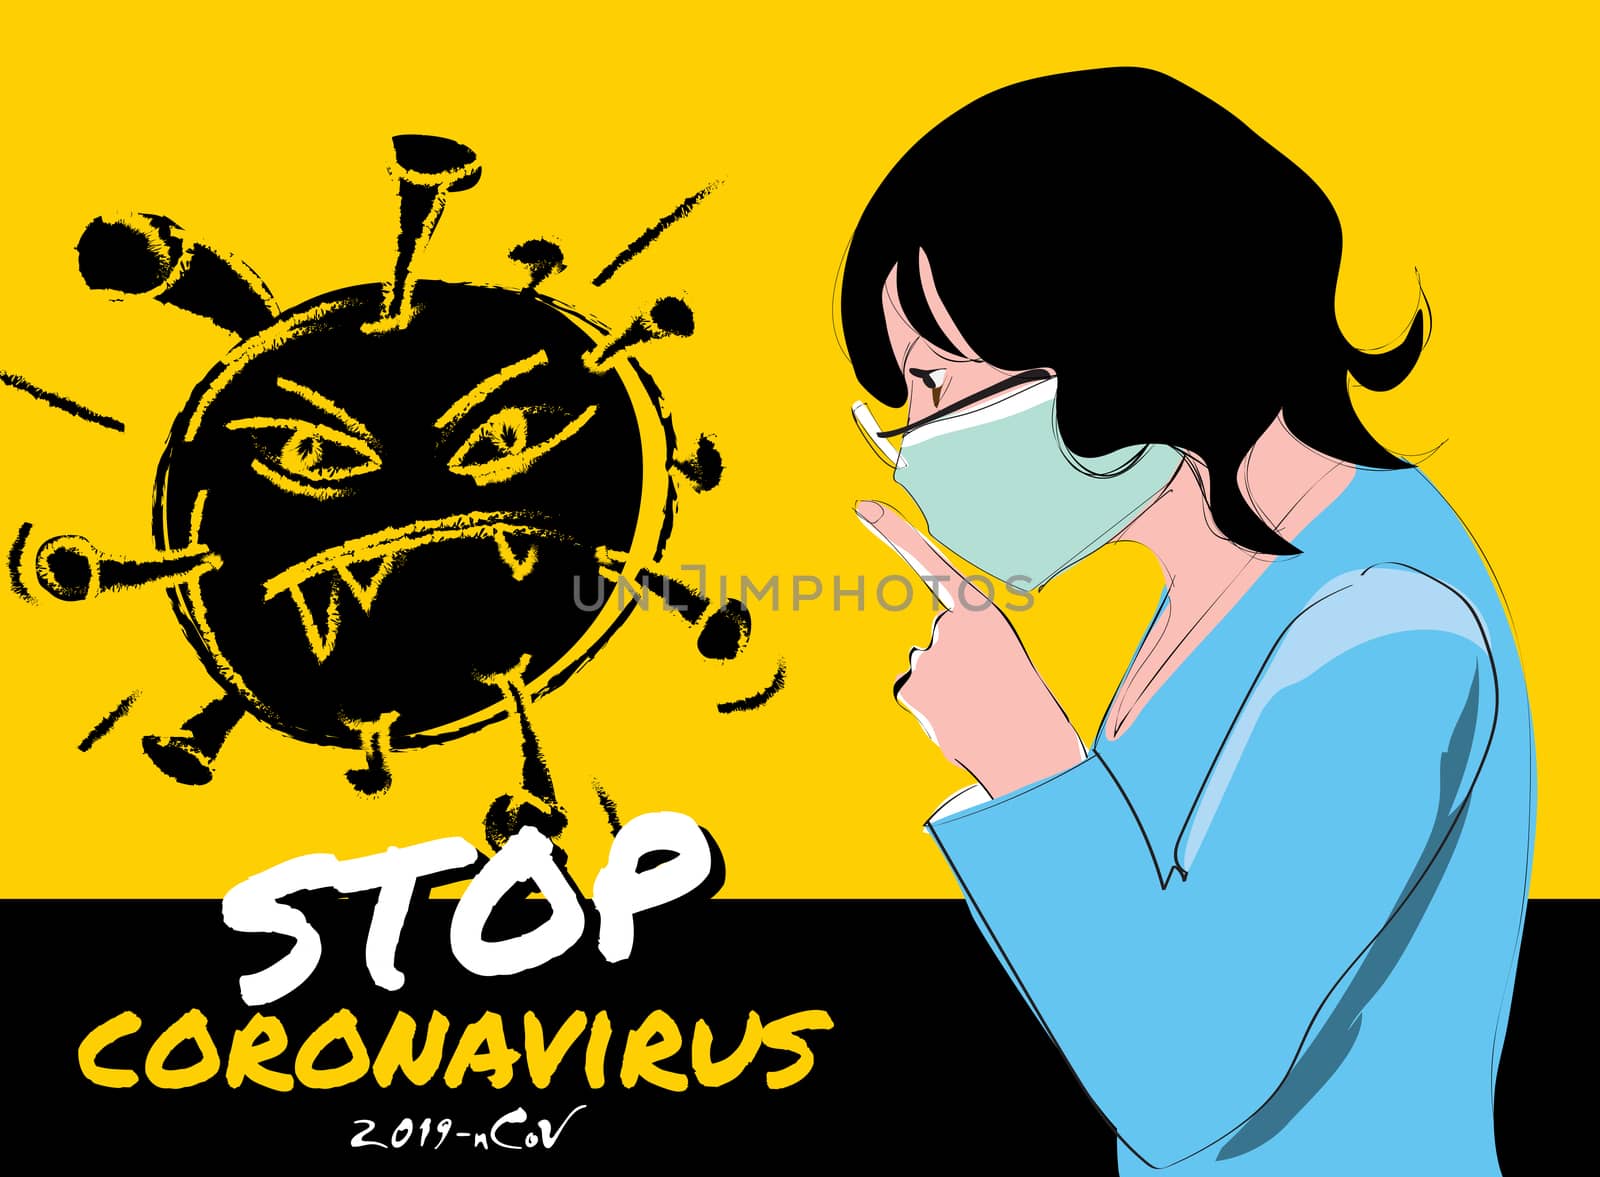 Pandemic Stop. Novel Coronavirus outbreak covid-19 2019-nCoV symptoms. Quarantine, self-isolation with protective mouth cap mask. Vector concept illustration. EPS 10